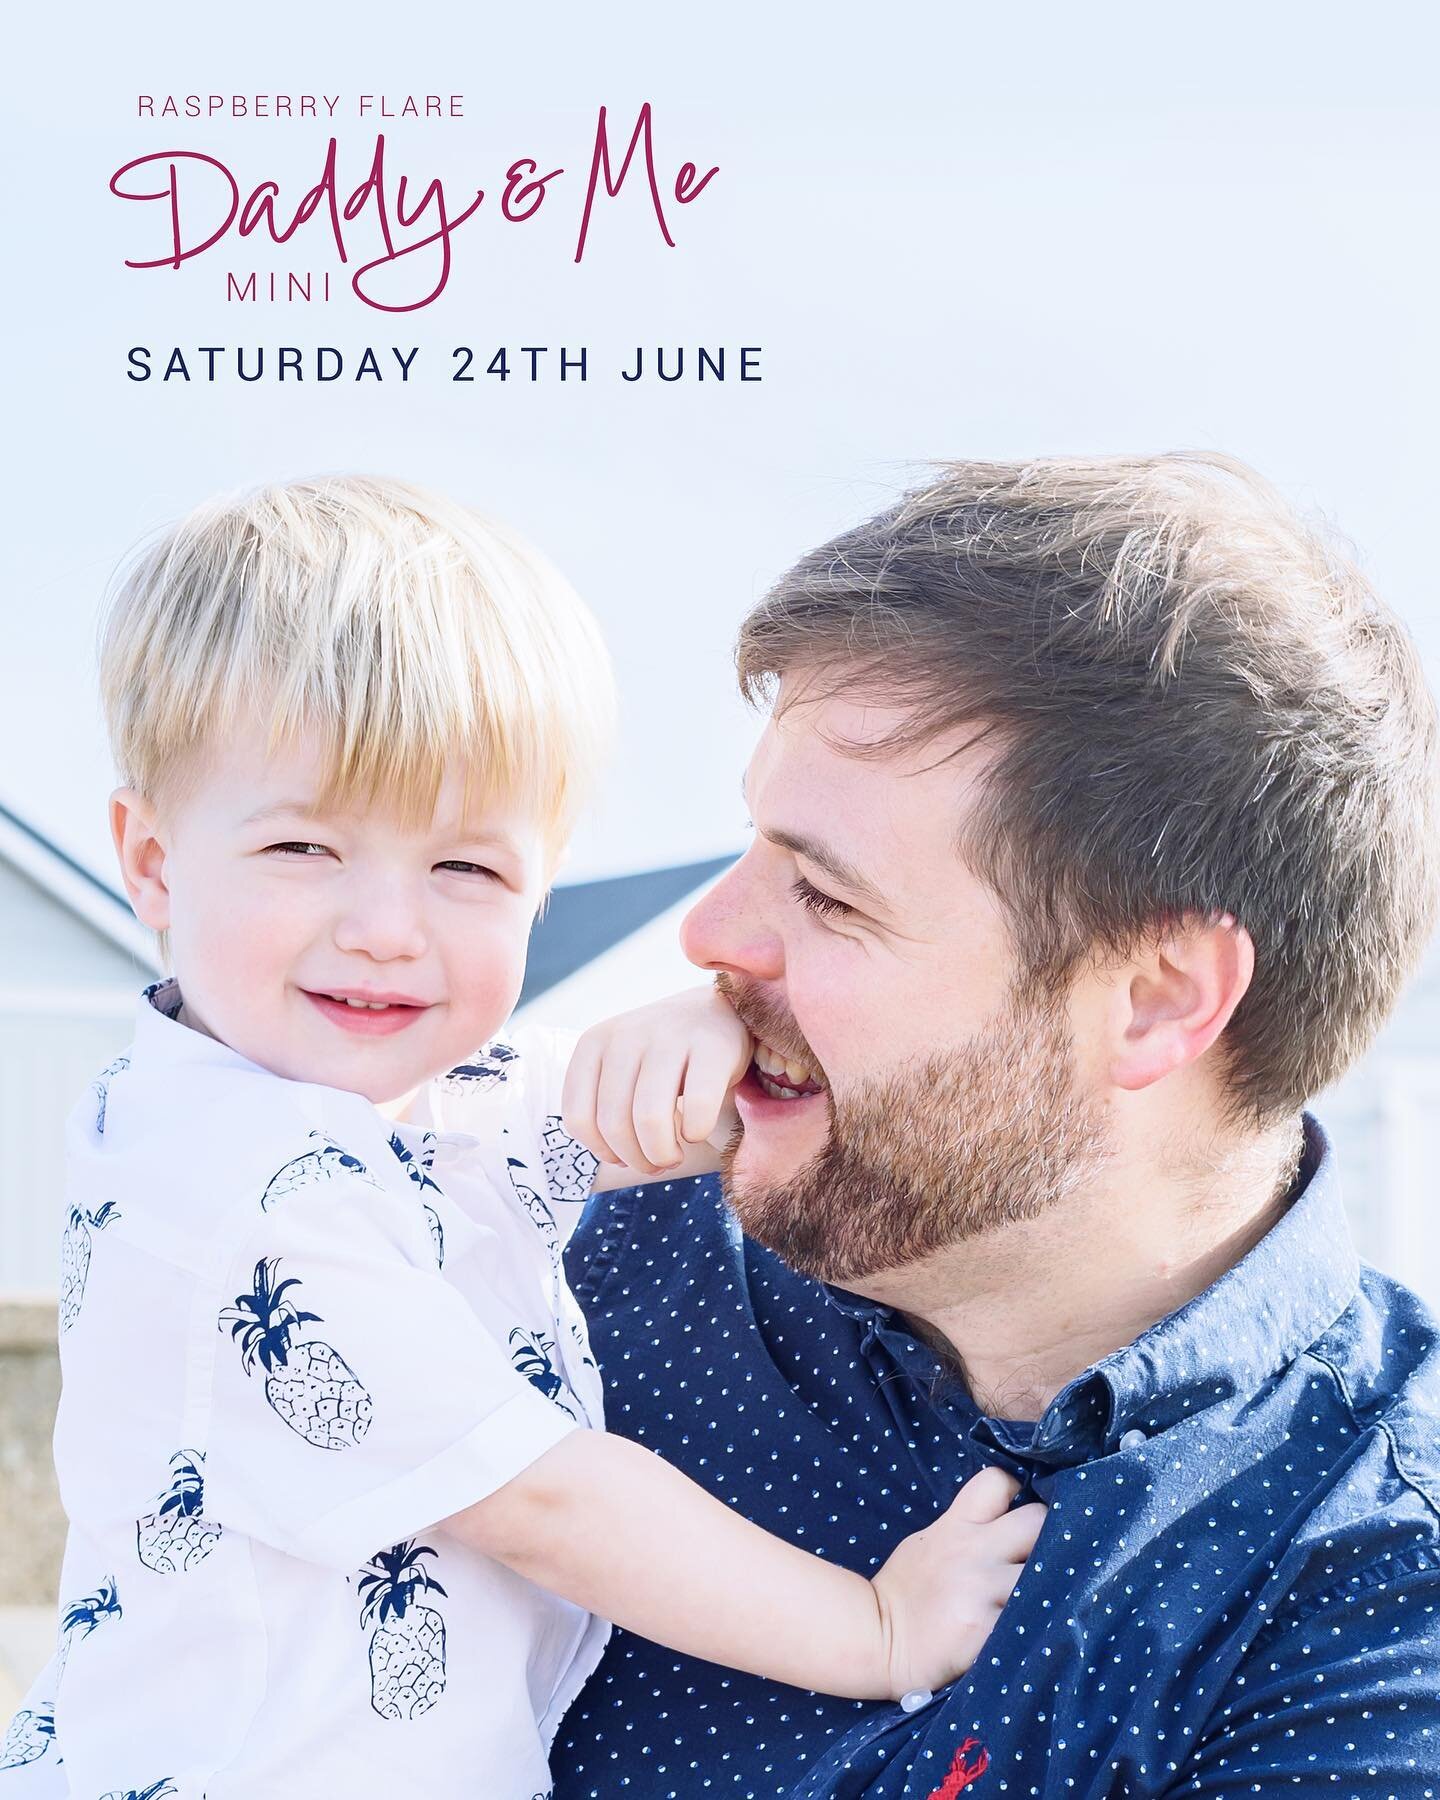 DADDY &amp; ME MINI
 
And this year we&rsquo;re heading to the beach 🏝️ Booking opens next Thursday 25th May at 8pm so pop it in your calendar@so not to miss out.
 
It&rsquo;s a chance for our dads, grandads and little ones to make some memories.
 
